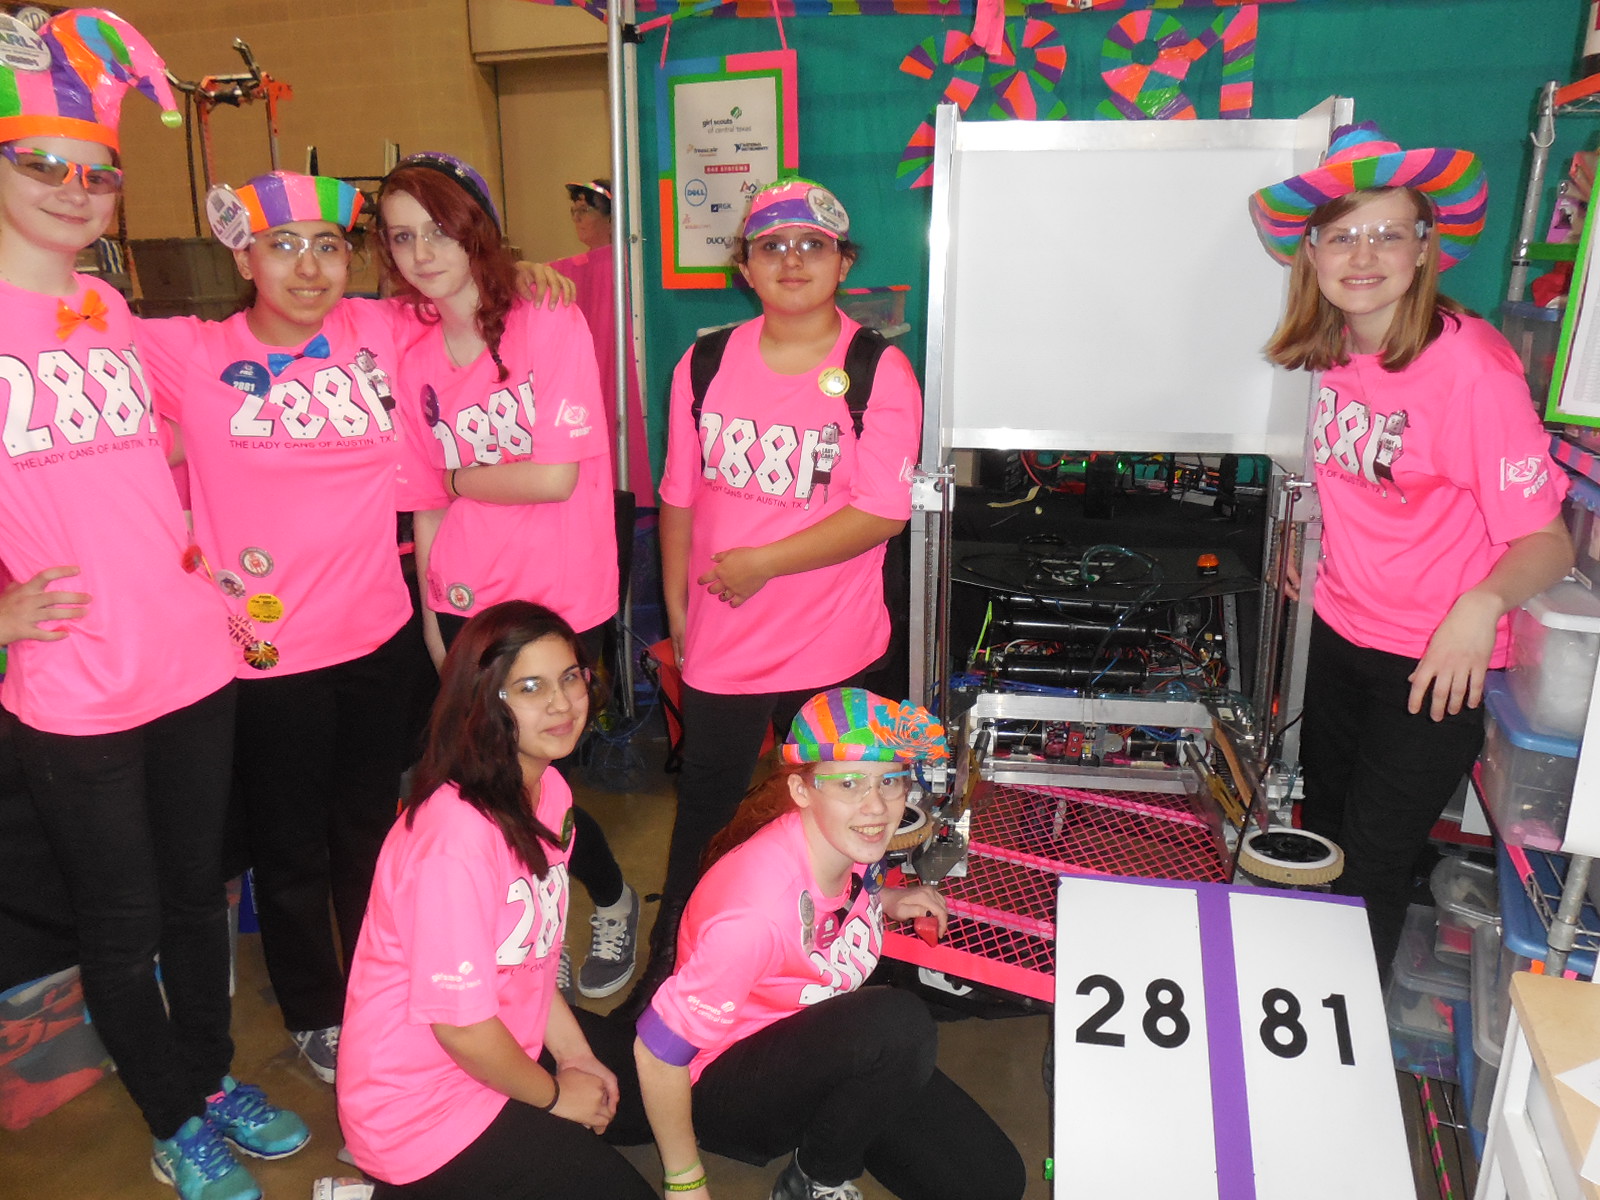 (Image) Girl power was in full force at this year’s robotic competition. The Pink Lady Hornets, an all-girl team from Flour Bluff High School in Corpus Christi, Texas, loves to compete and is on a mission to change the future of robotics by encouraging young girls to pursue STEM fields.